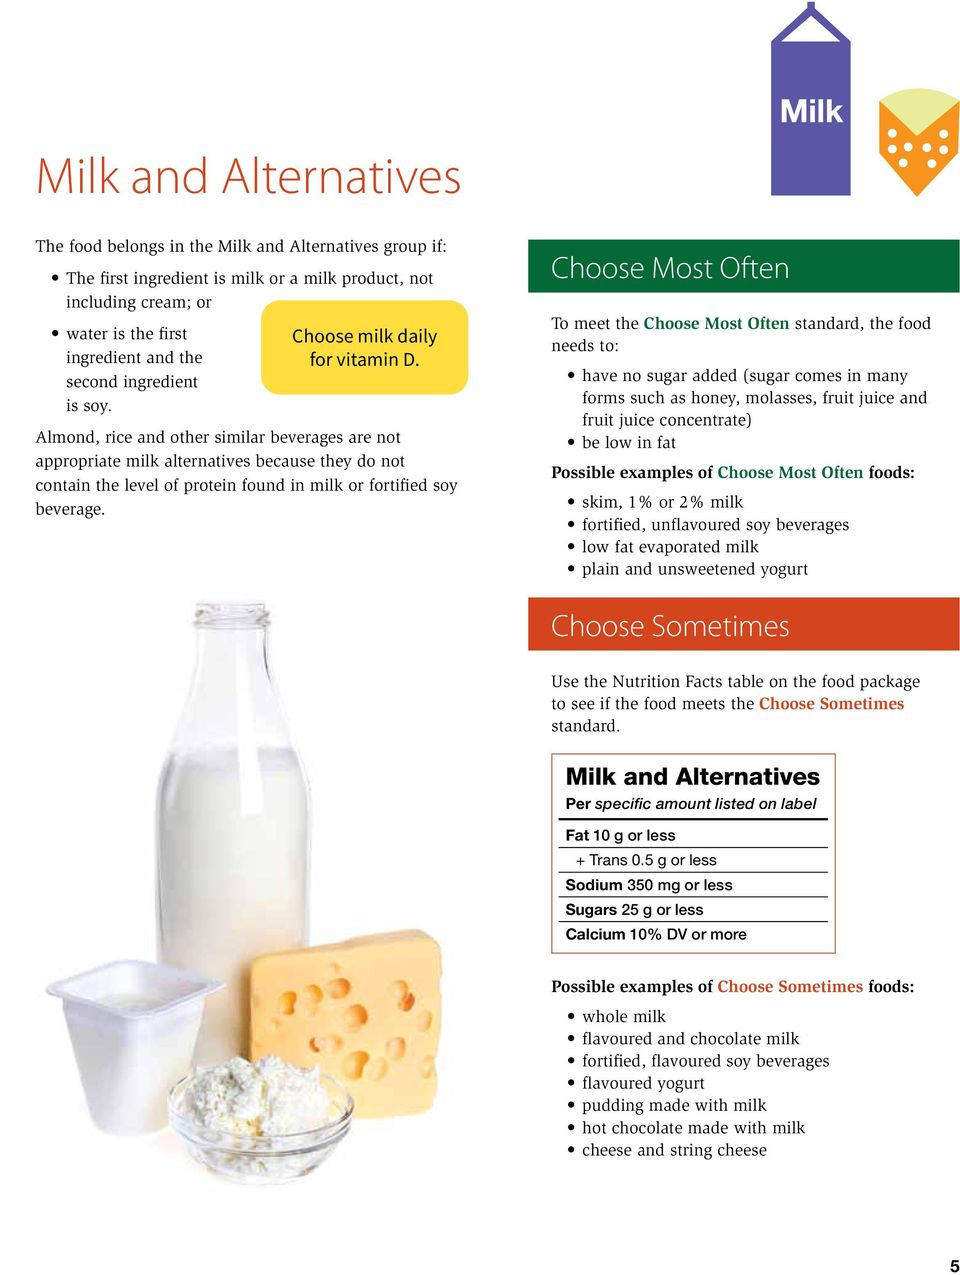 Almond, rice and other similar beverages are not appropriate milk alternatives because they do not contain the level of protein found in milk or fortified soy beverage.